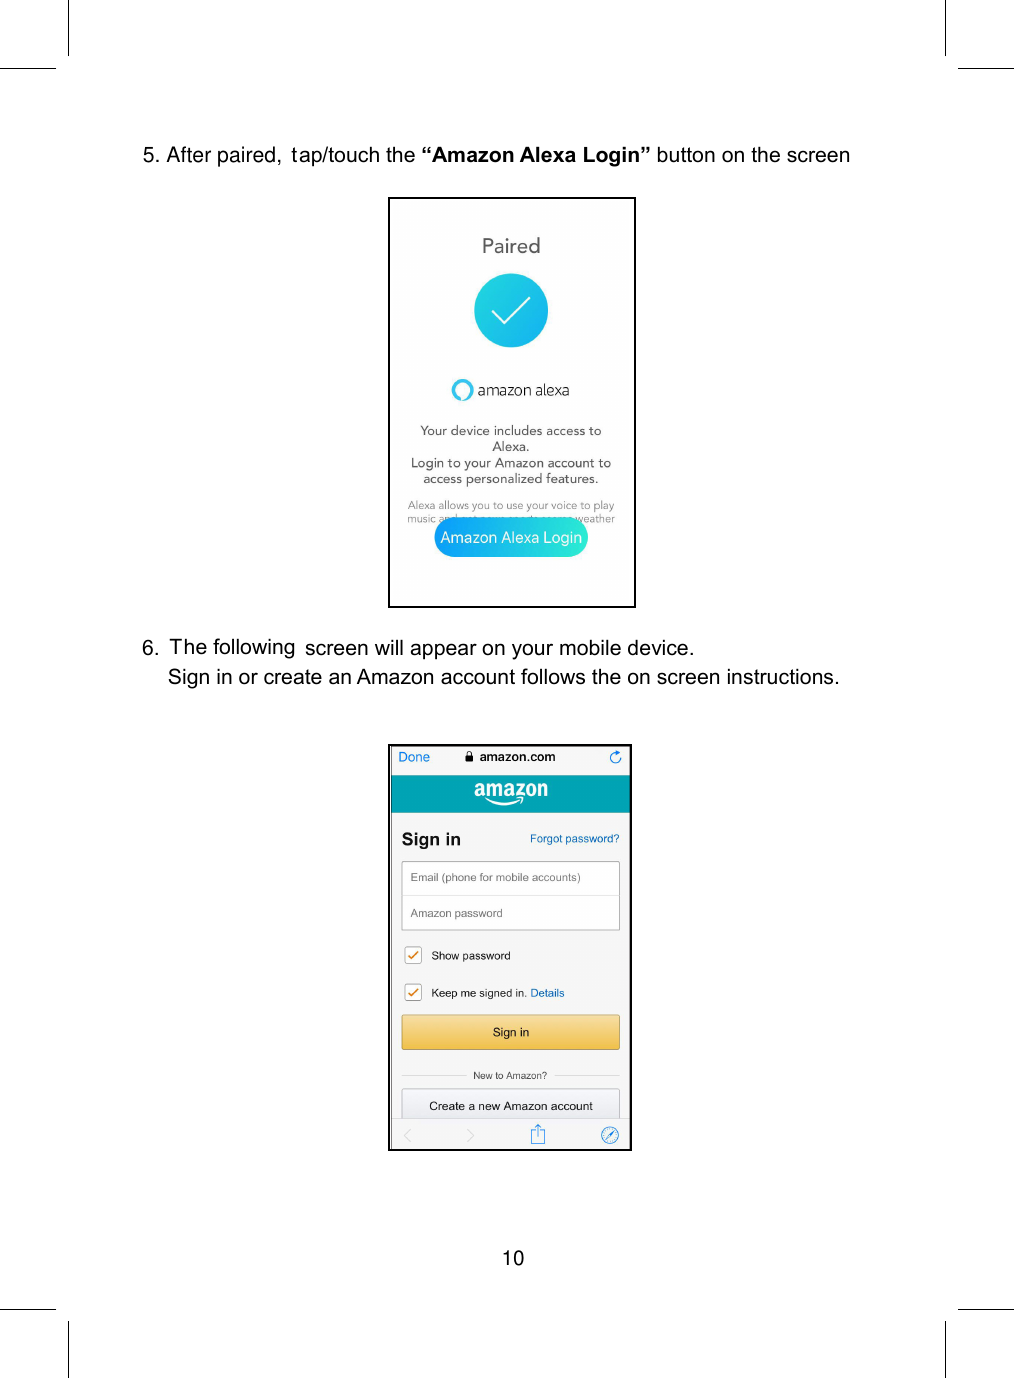 105. After paired, tap/touch the “Amazon Alexa Login” button on the screenThe followingscreen will appear on your mobile device.6.Sign in or create an Amazon account follows the on screen instructions.